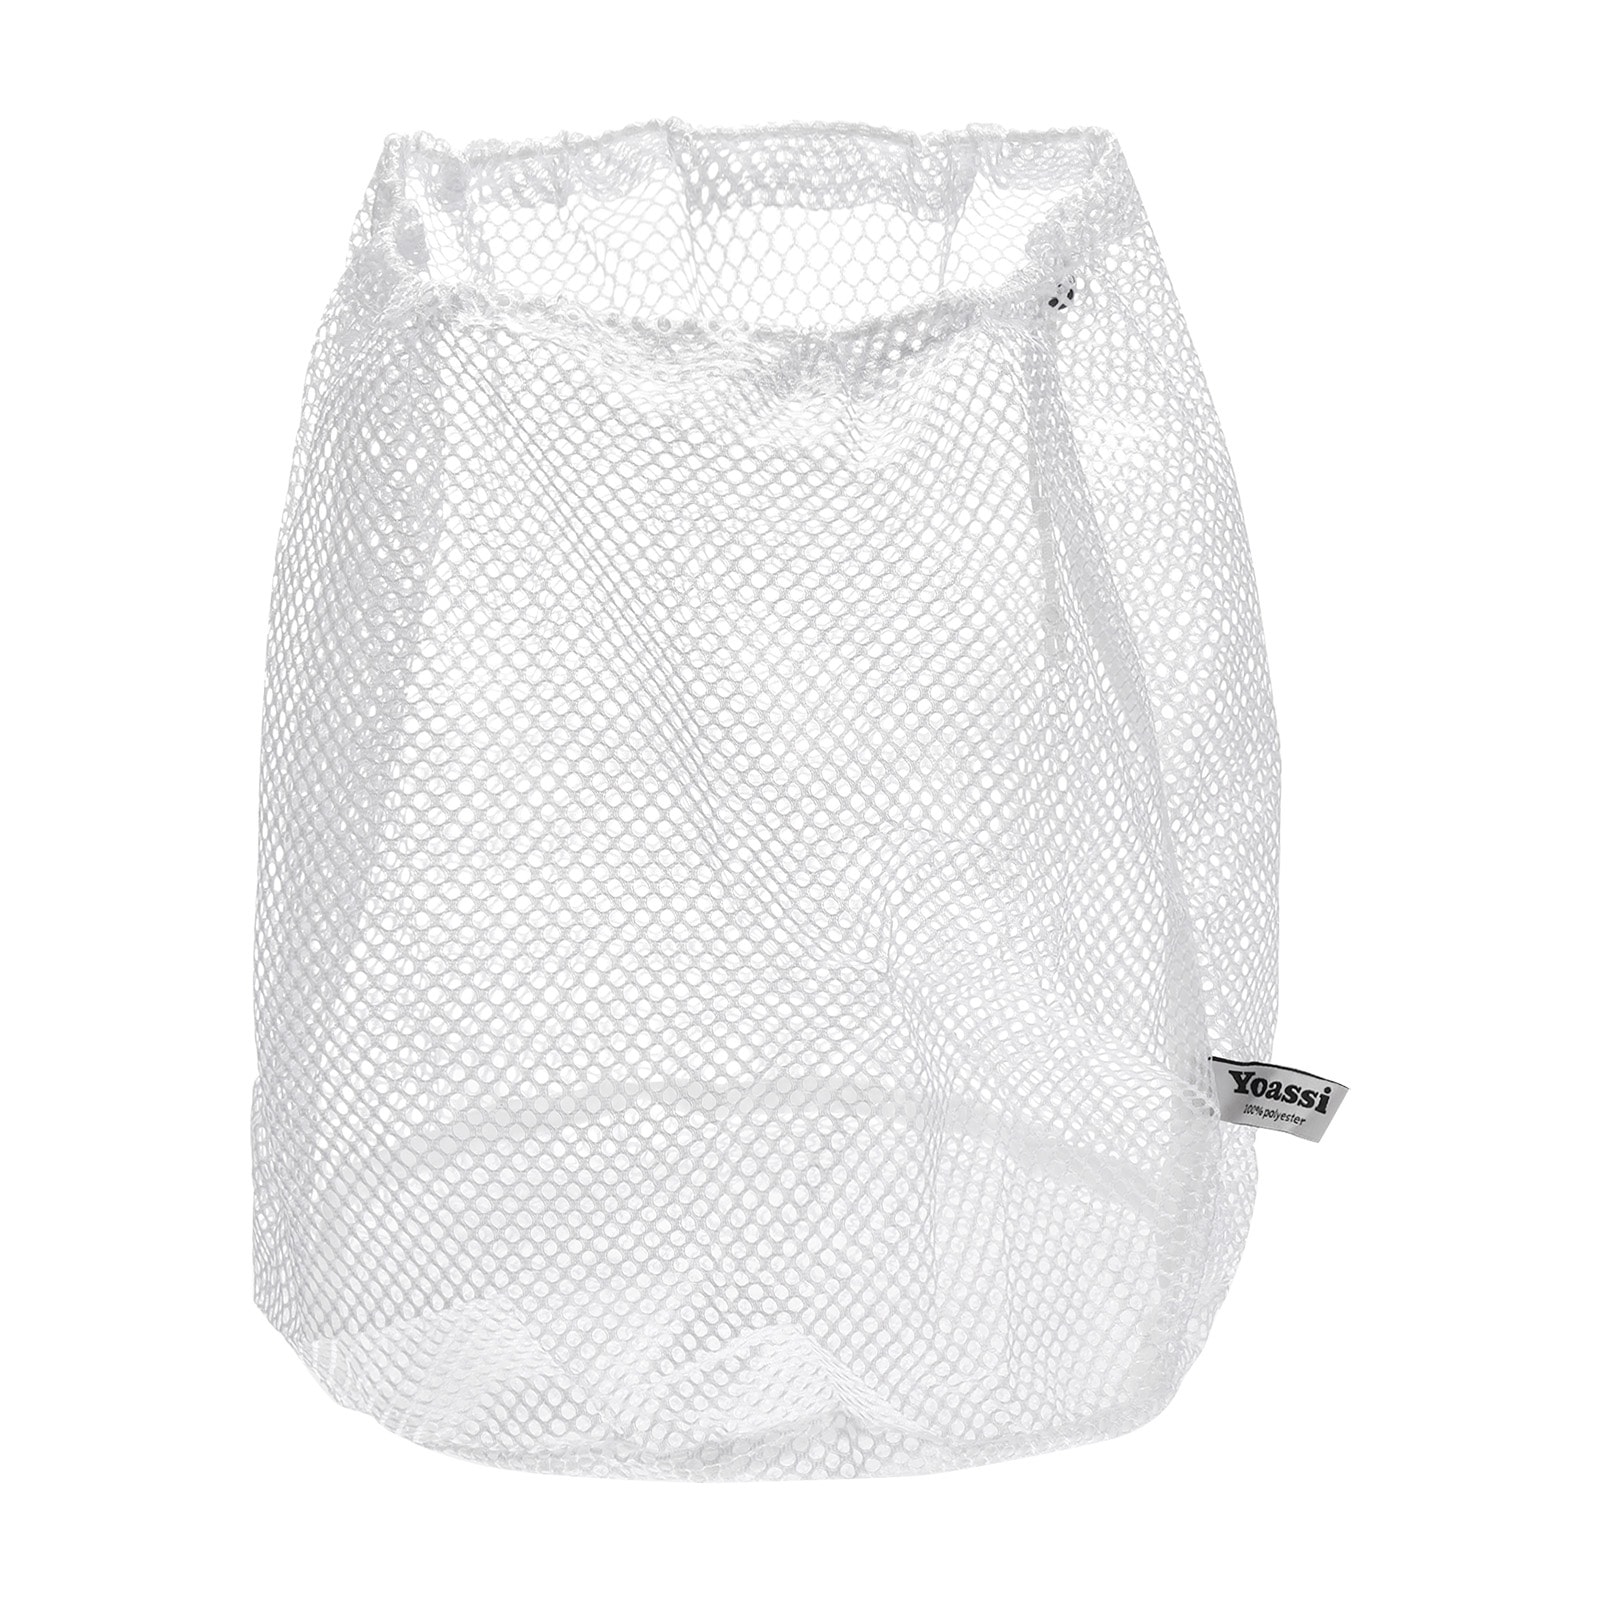  Lingerie Bags for Washing Delicates,Small Fine Mesh Laundry Bags,3Pcs(1  Large,1 Medium,1 Small) : Home & Kitchen